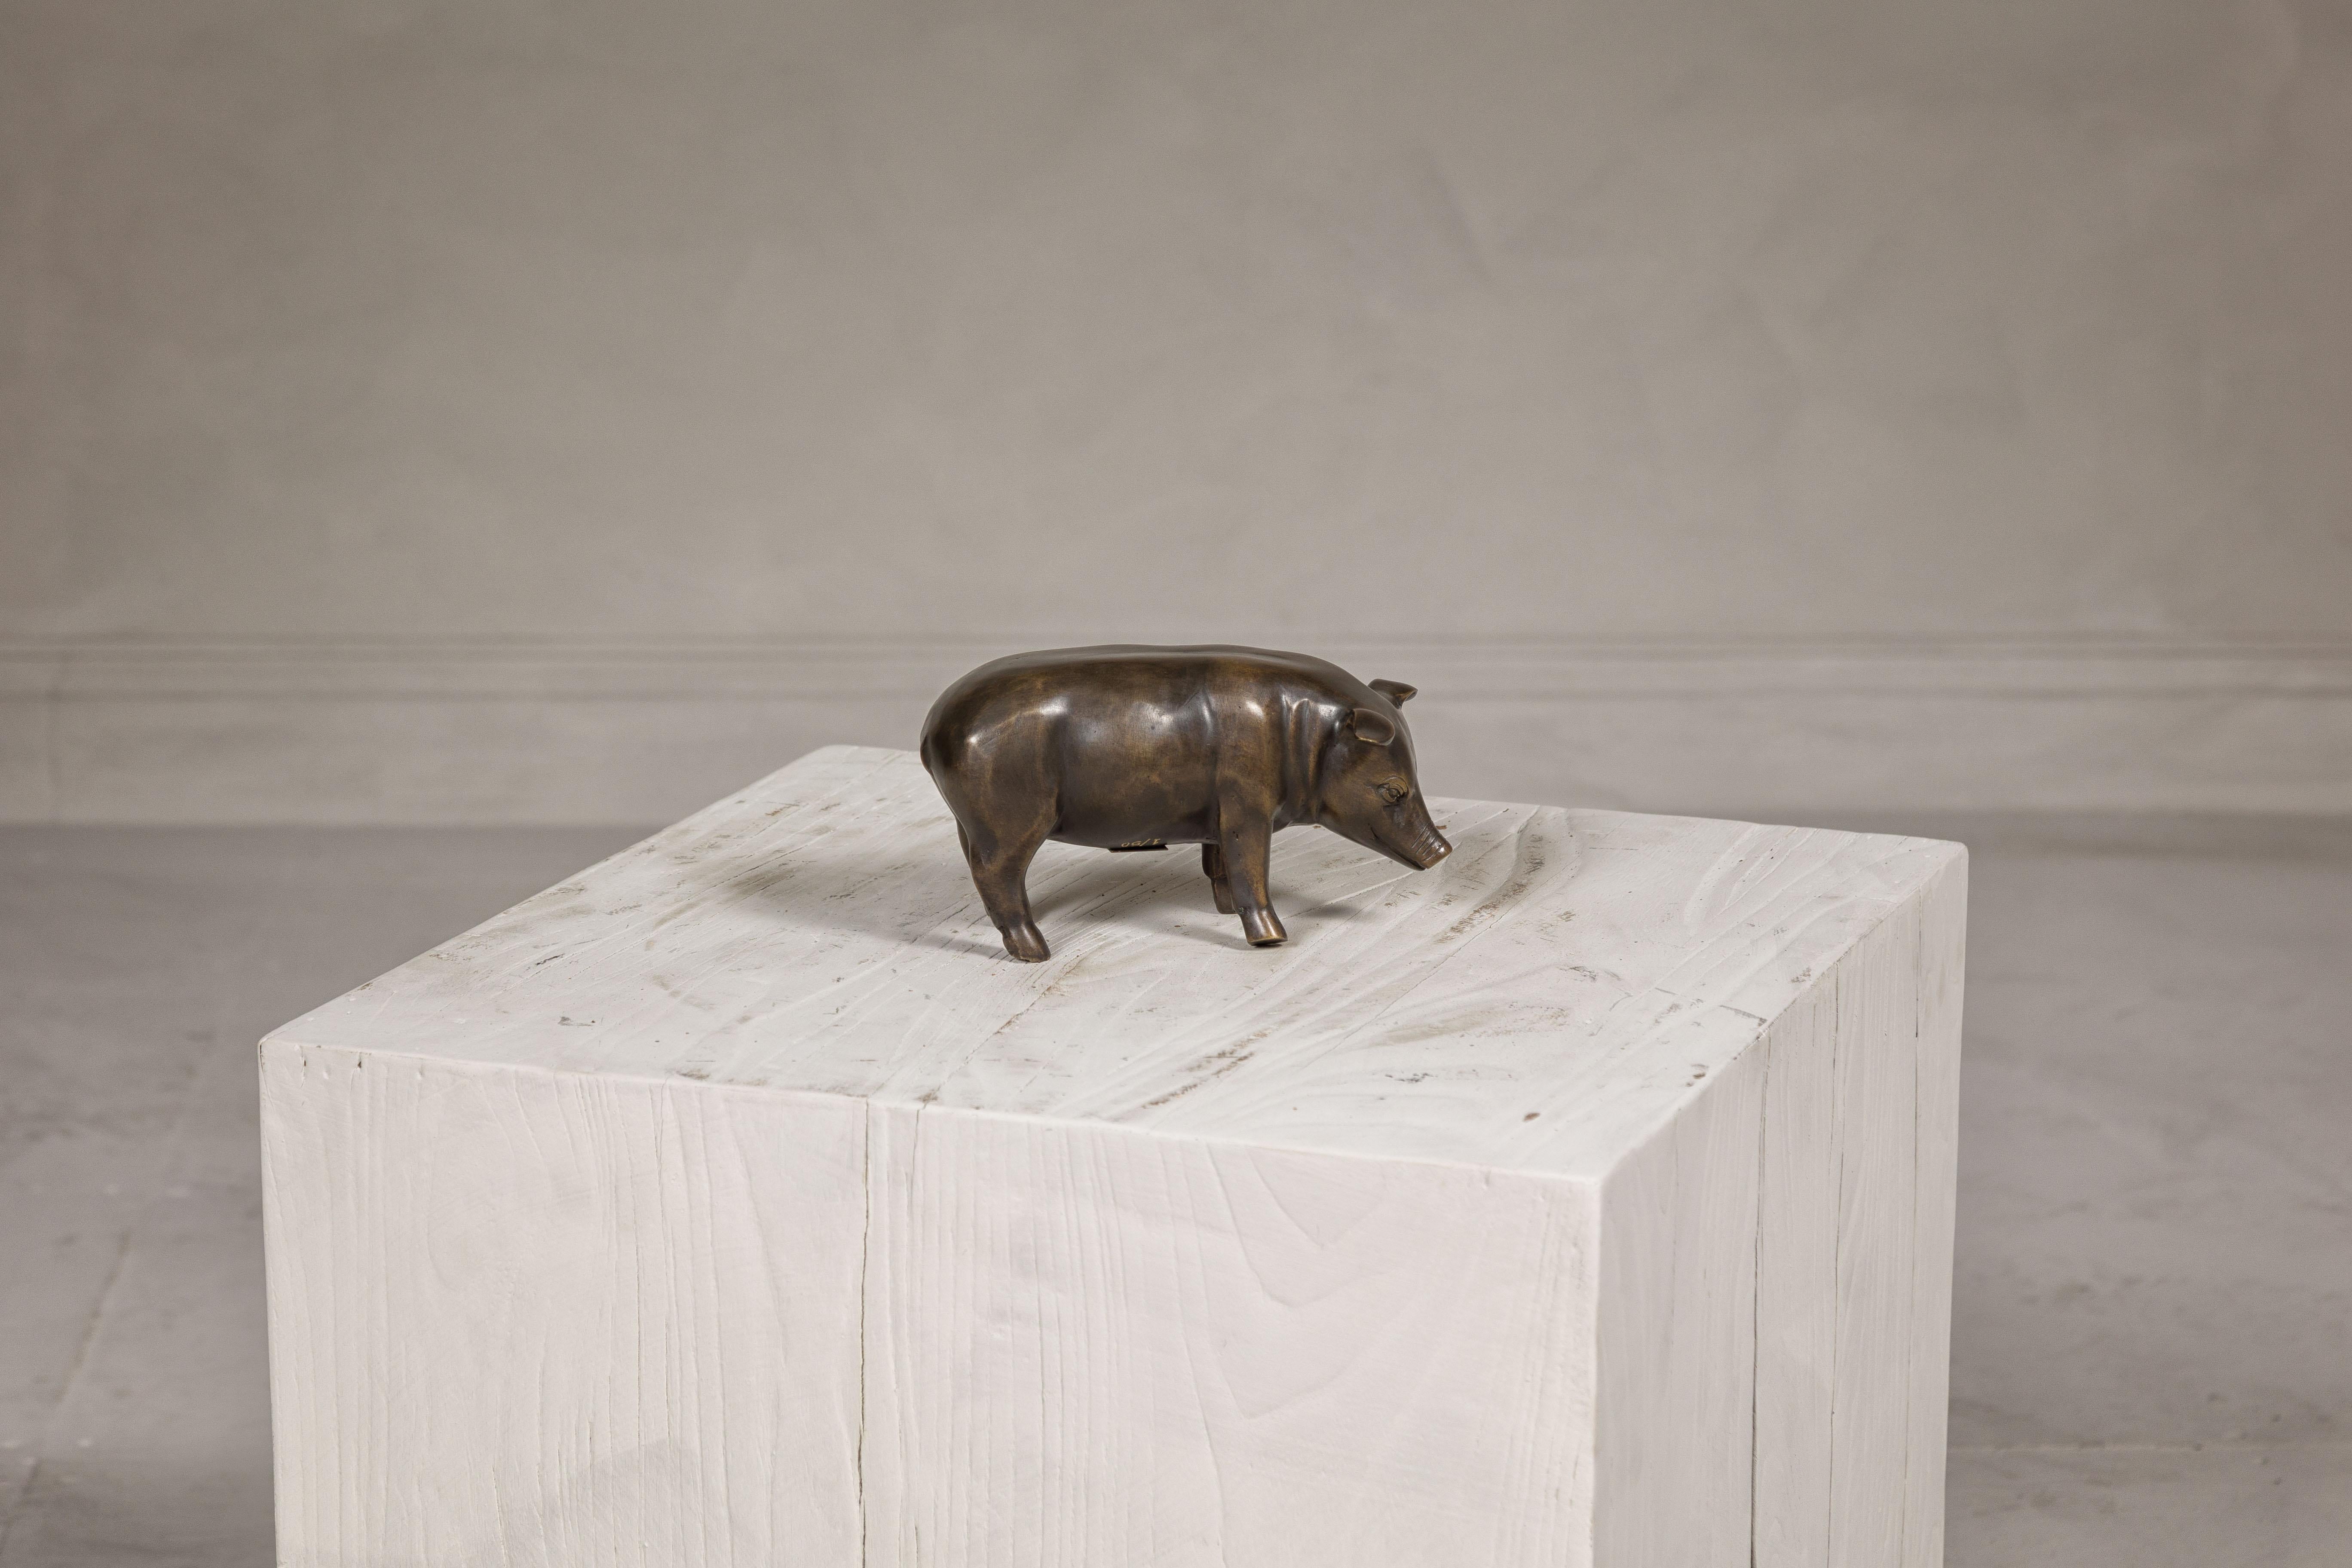 A limited edition cast bronze pig statuette from the Randolph Rose Collection. Crafted with meticulous detail, this limited edition cast bronze pig statuette is a charming piece from the Randolph Rose Collection. 

Number 1 out of a series of 50,